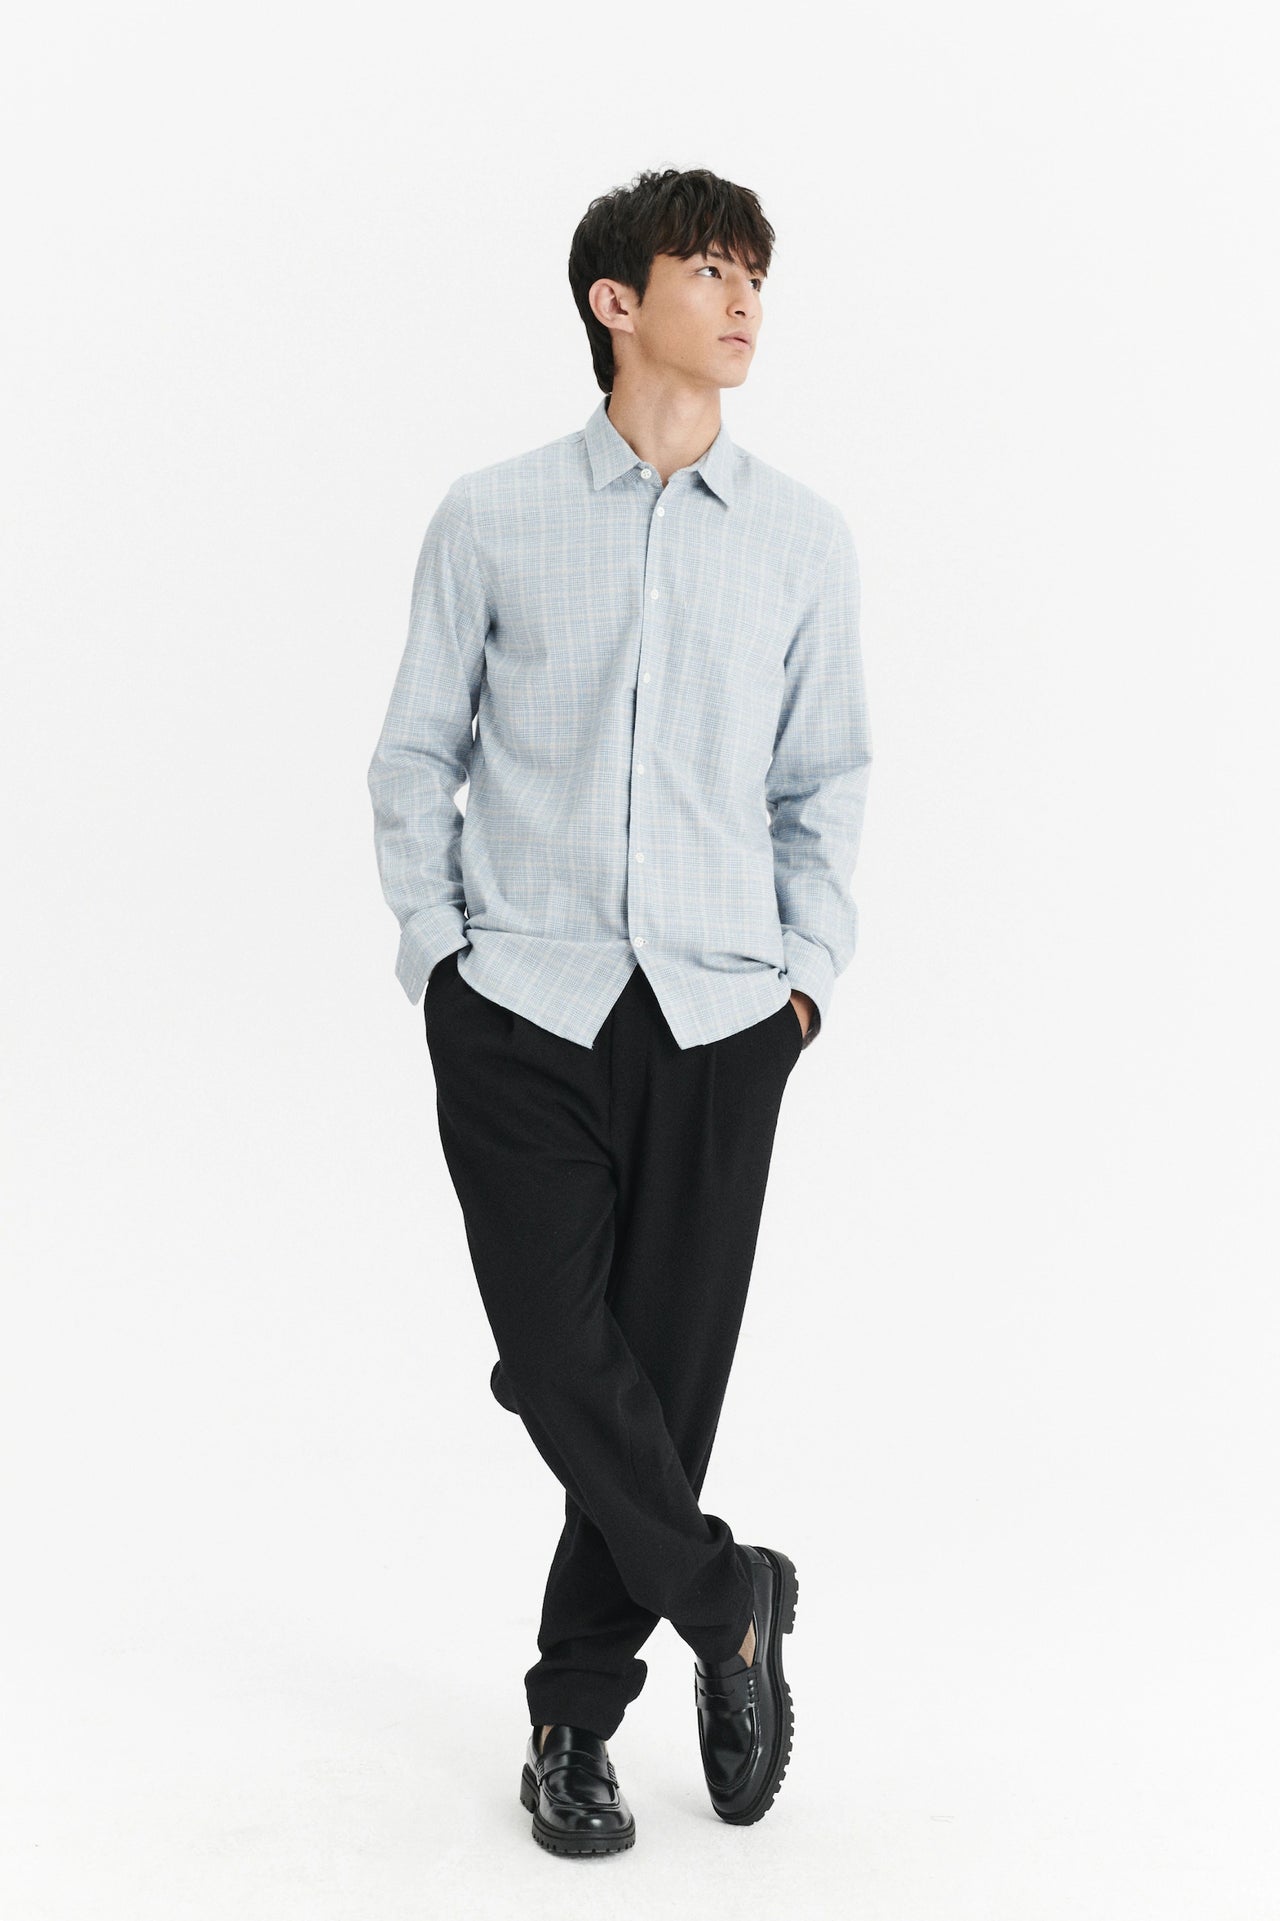 Feel Good Shirt in a Blue and Beige Portuguese Cotton and Cashmere Flannel